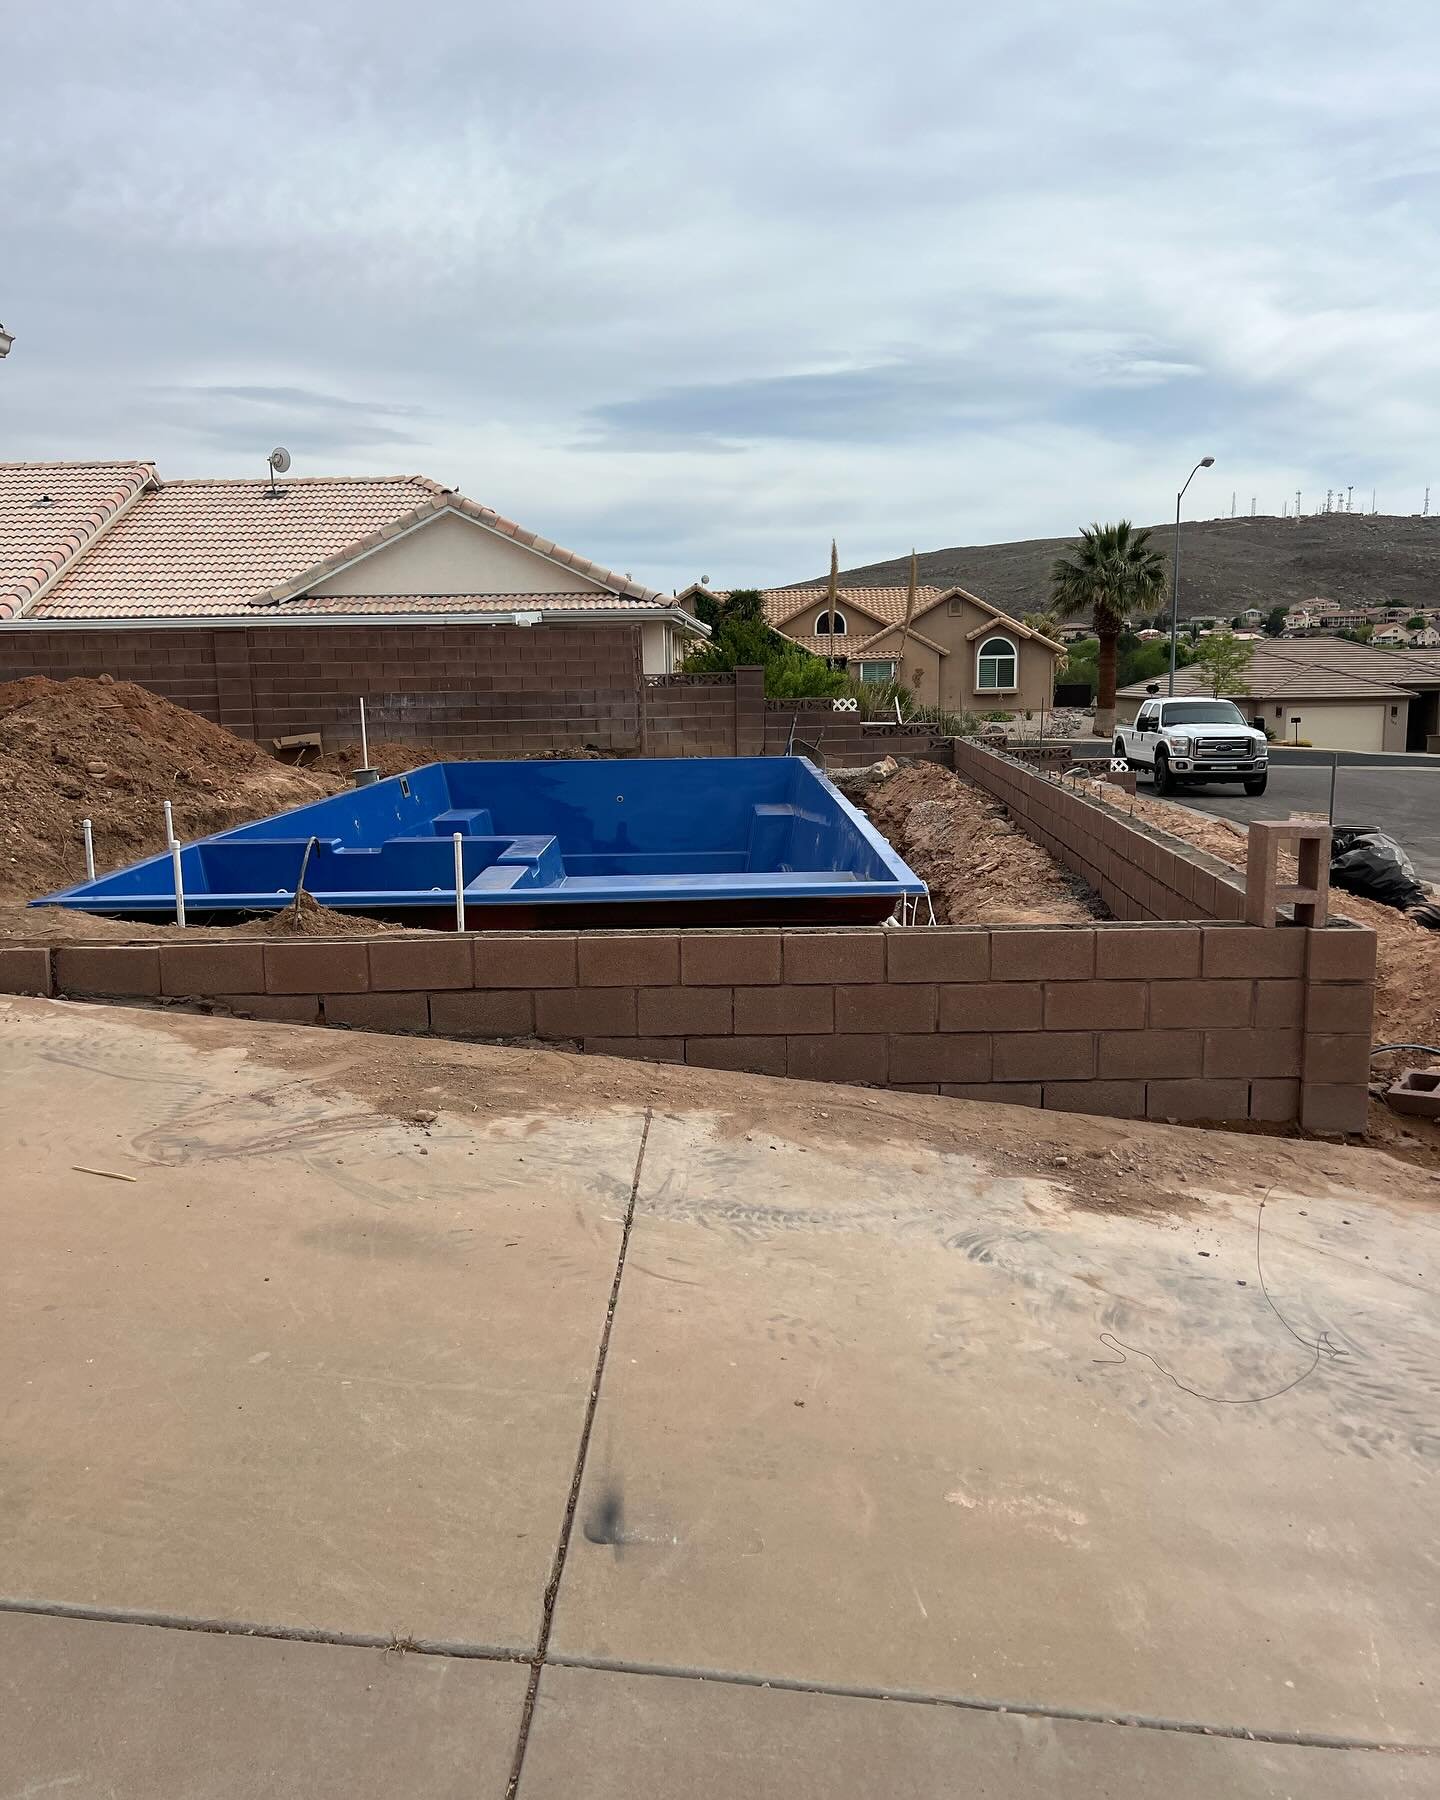 &ldquo;Exciting update! Our block retaining wall is officially finished, paving the way for pool backfilling. 🏊&zwj;♂️ We&rsquo;ve meticulously followed county code standards, ensuring top-notch concrete work and rebar reinforcement. Check out our p